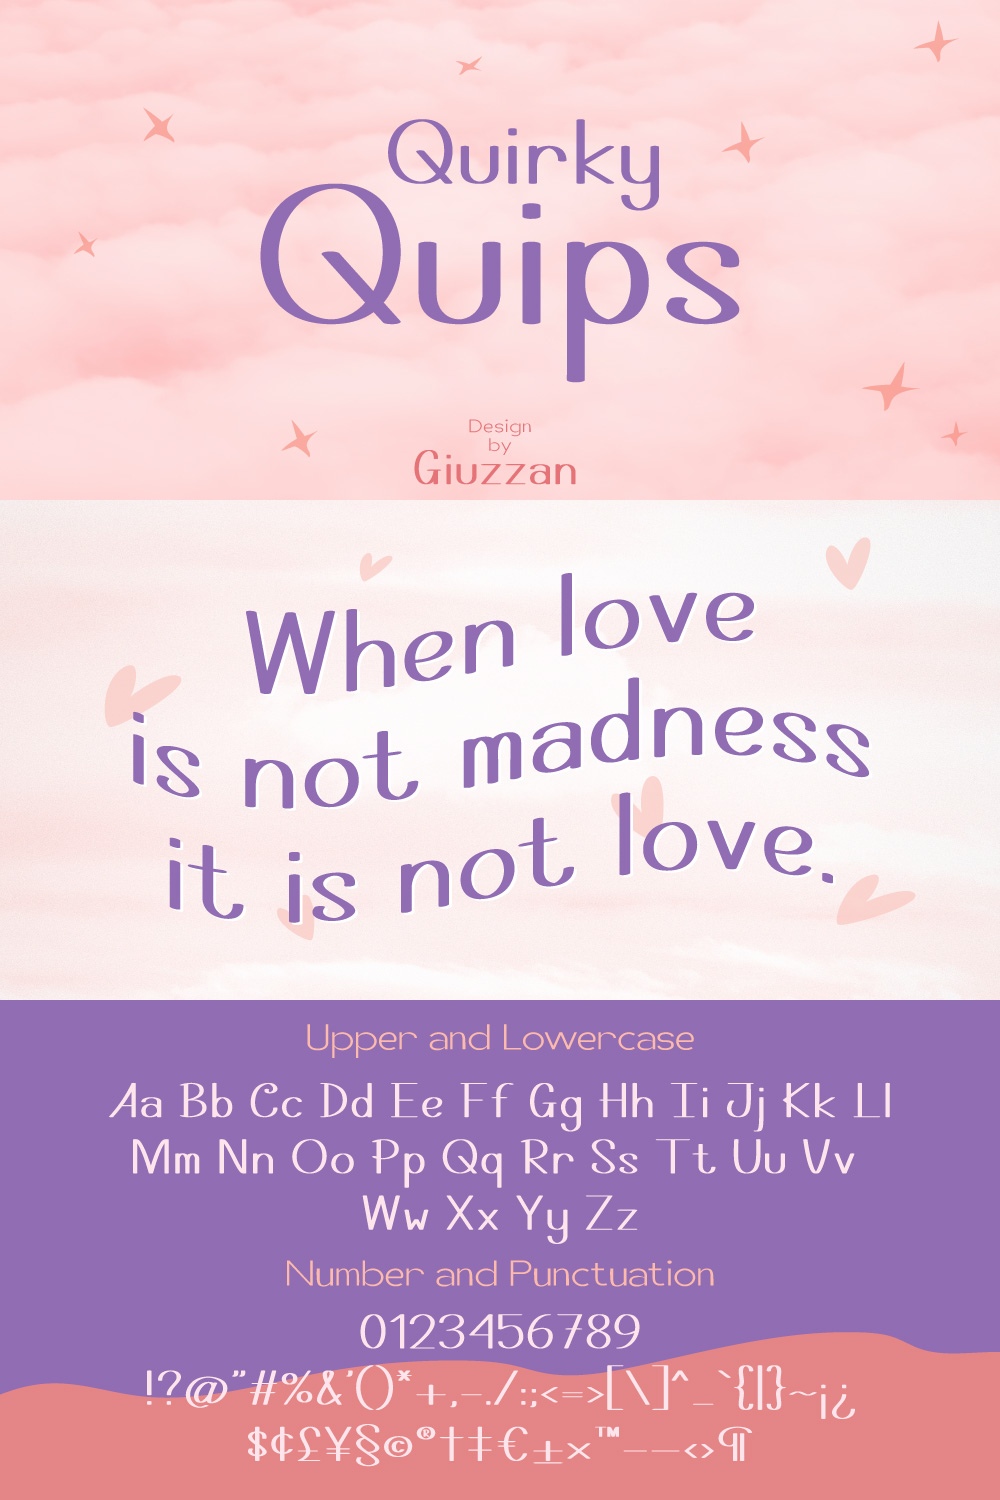 Quirky Quips pinterest preview image.